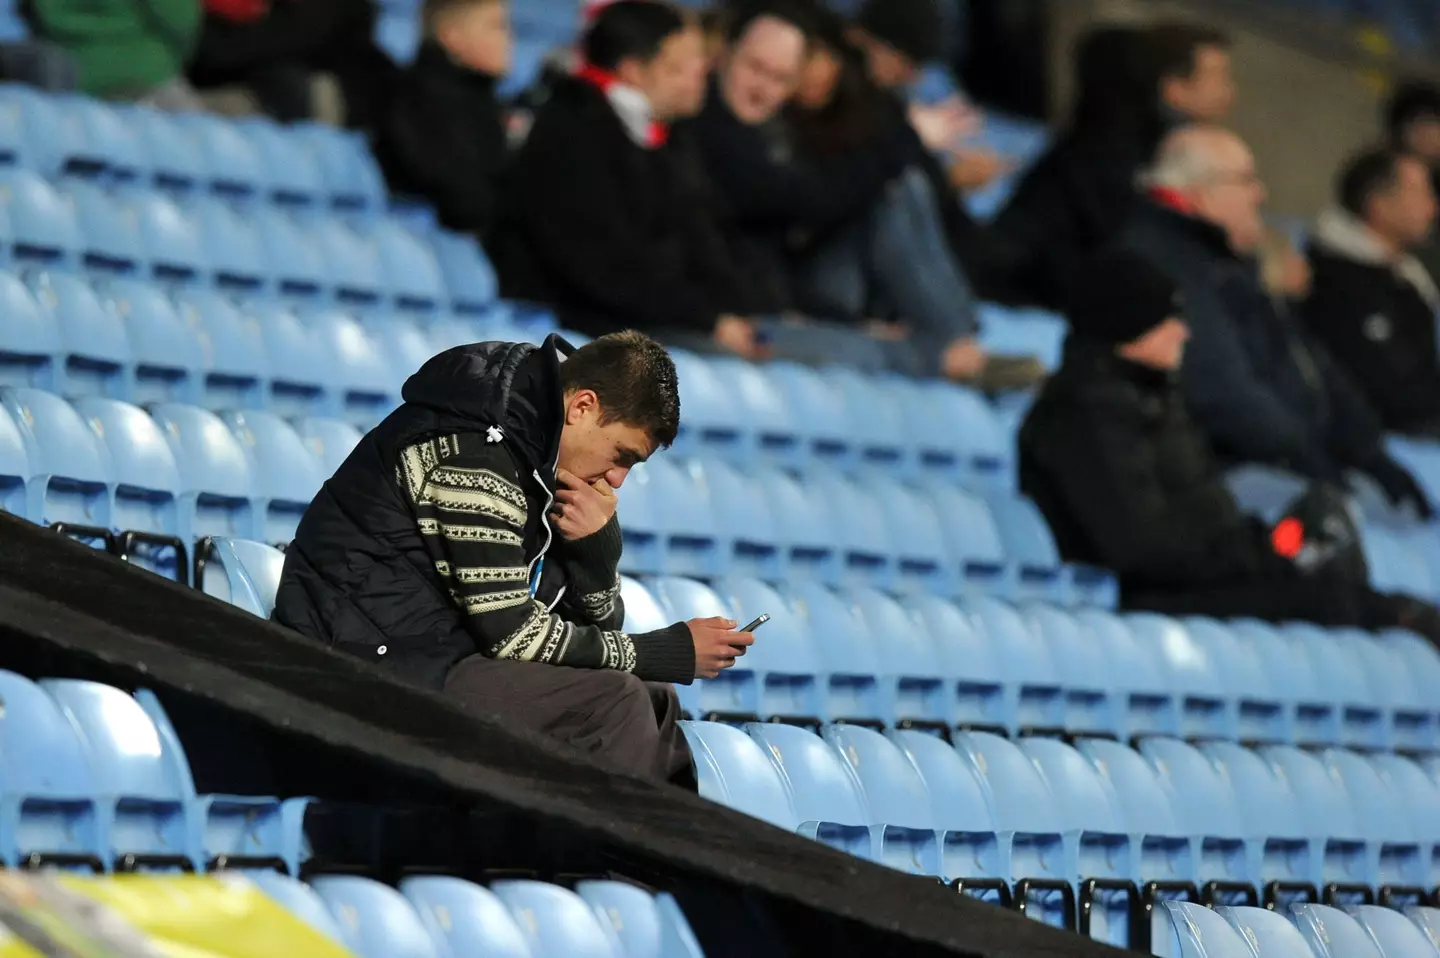 A Morecambe fan on his phone in the stands of the Ricoh Arena |